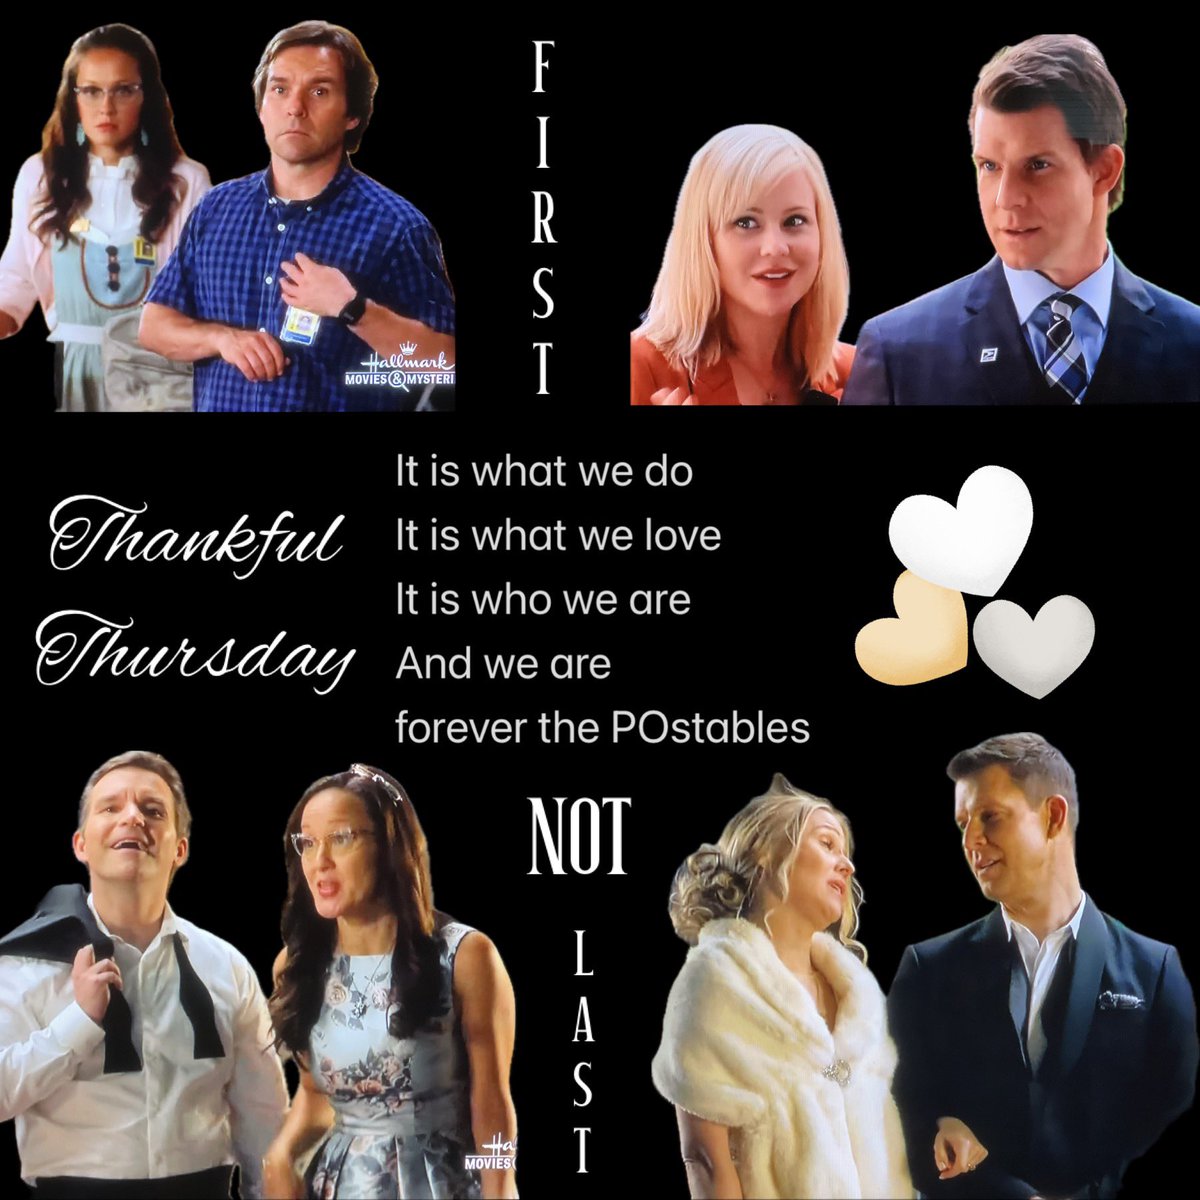 #ThankfulThursday What an amazing several weeks of filming #SSD12 & #SSD13 🎬 What an amazing cast💙 @Eric_Mabius @kristintbooth @RealCrystalLowe @geoffgustafson @MarthaMoonWater We are Thankful for the First and the NOT Last! #POstables #LisaHamiltonDaly